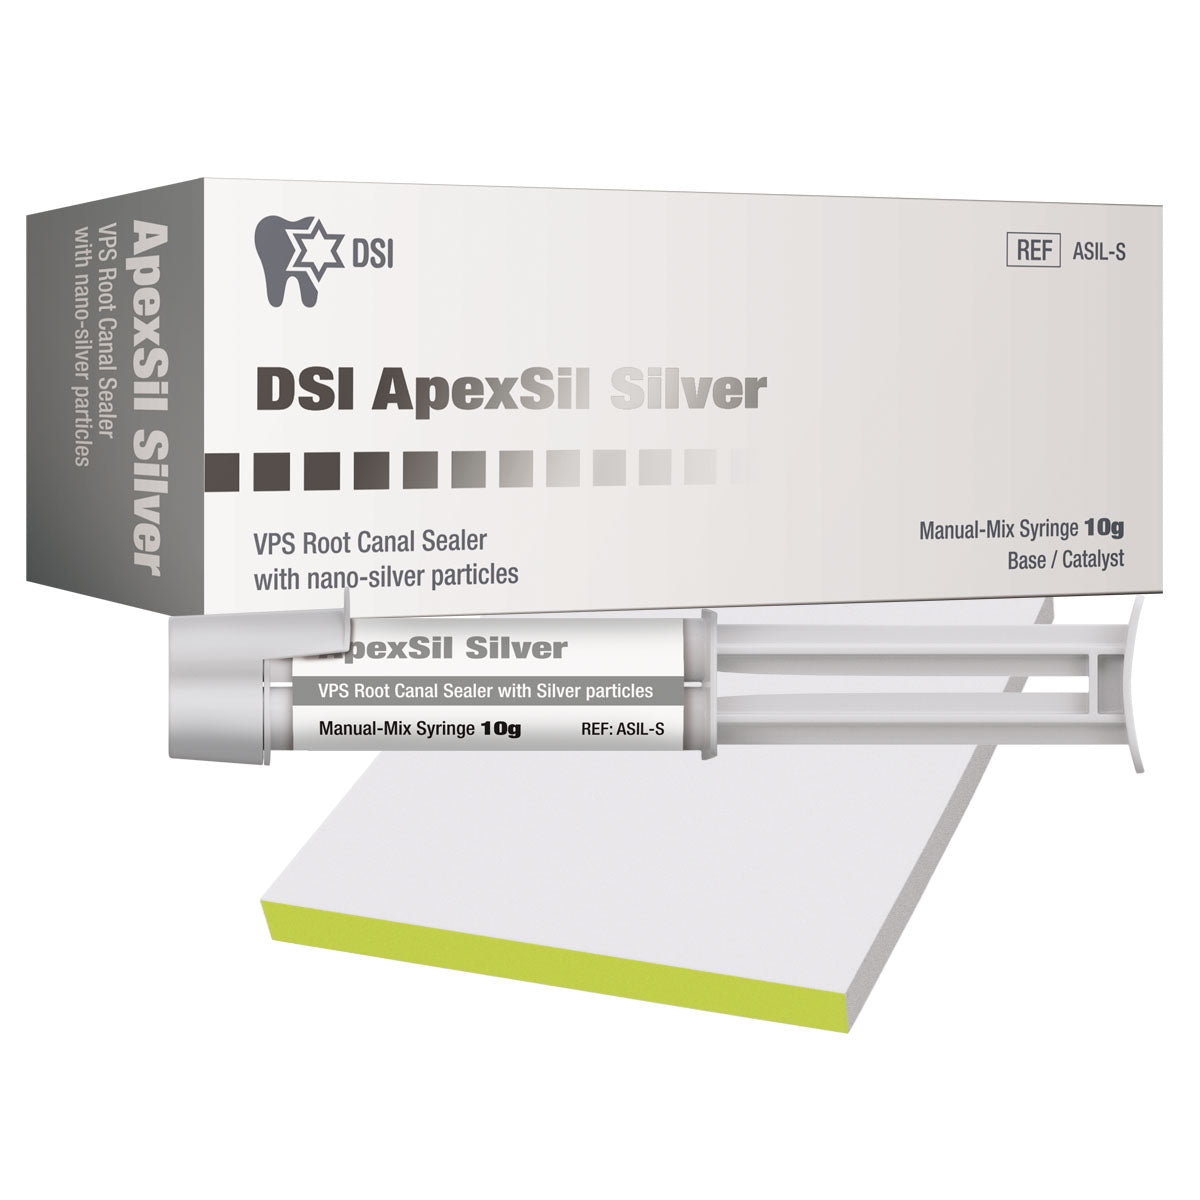 DSI Apexsil Silver Liquid Gutta Root Canal Sealer with nano-silver particles 10g